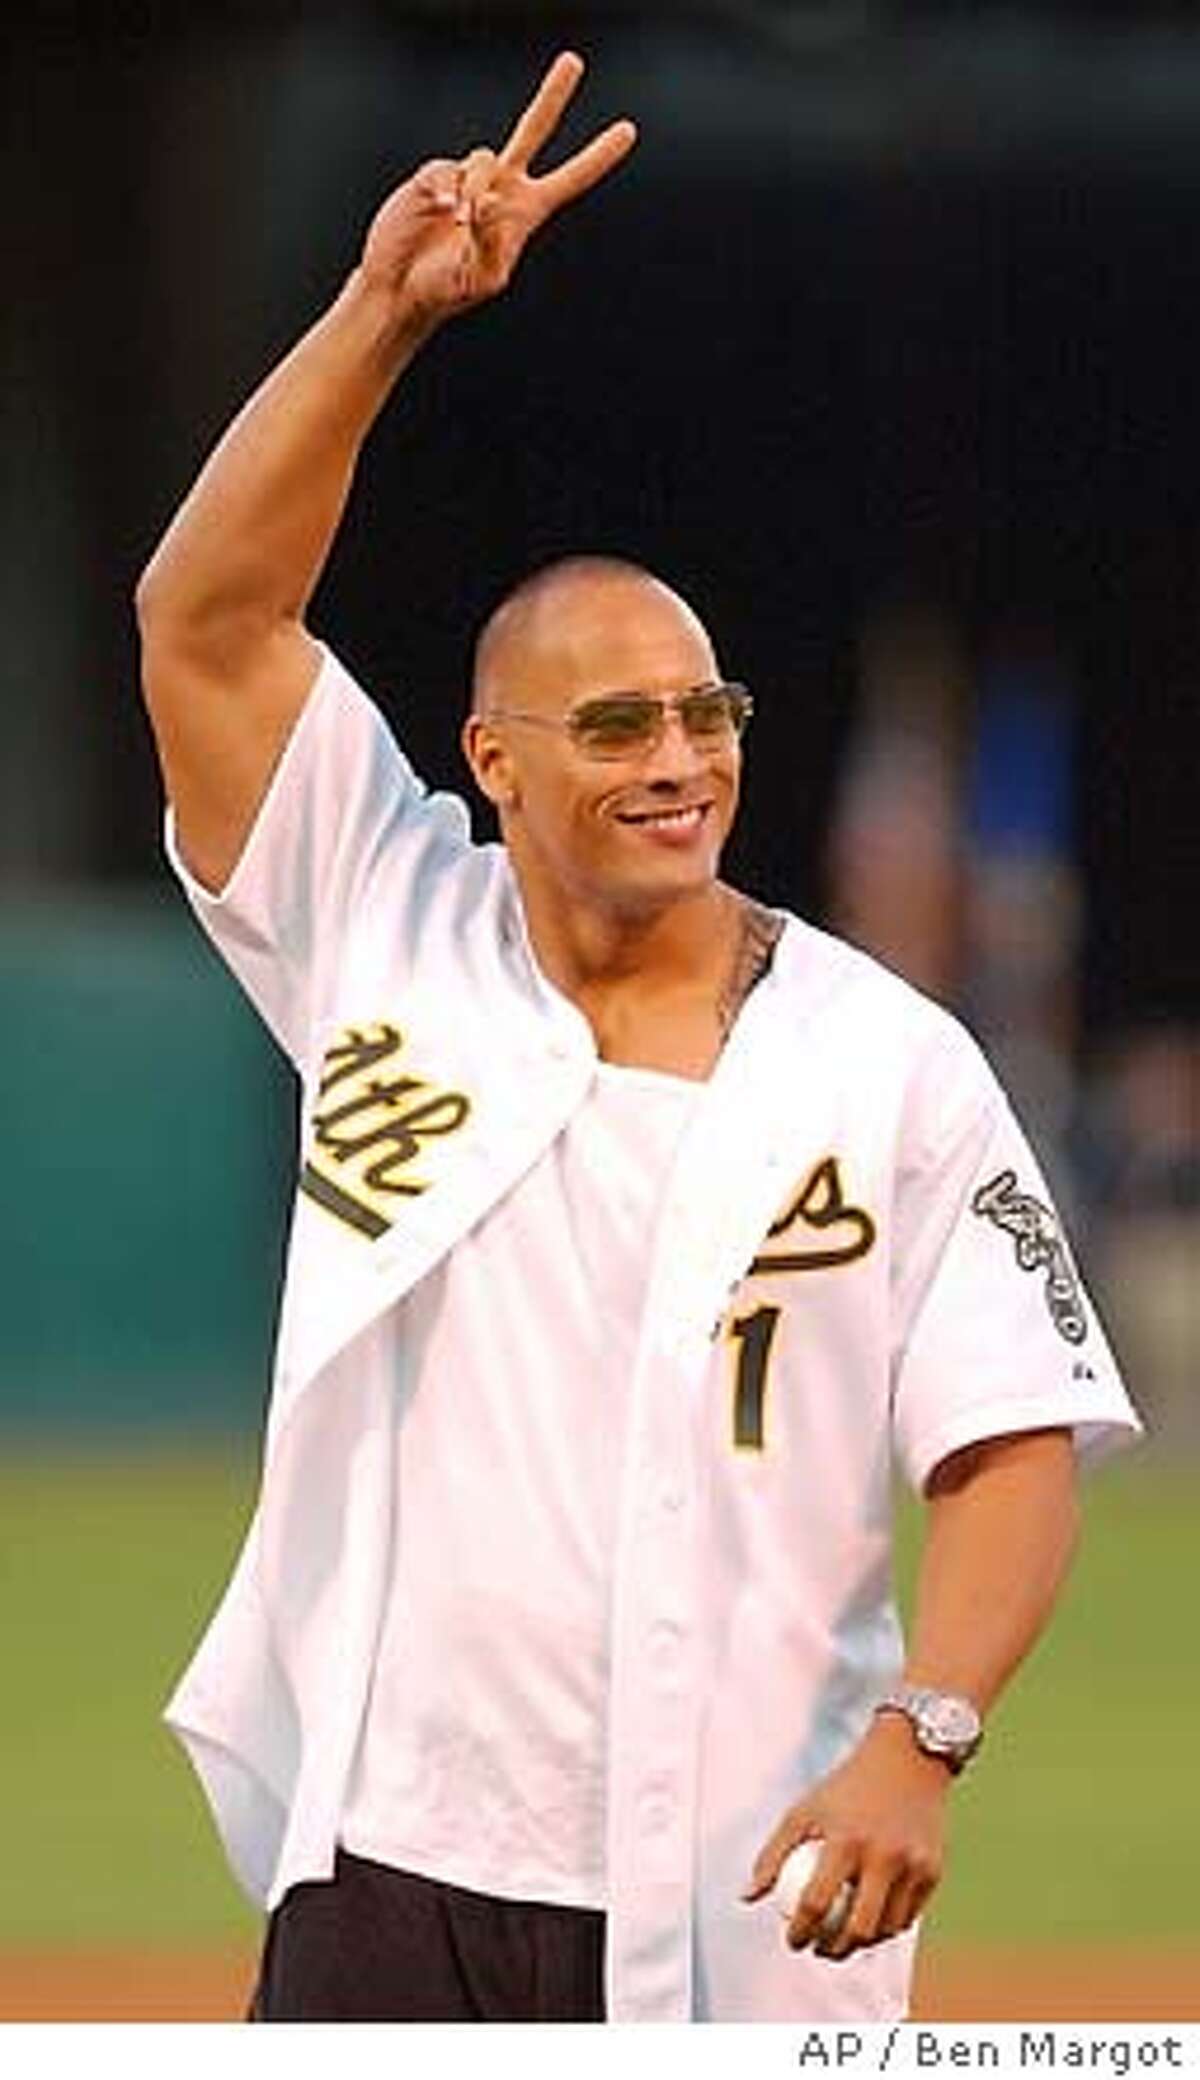 Wrestler turned actor "The Rock" flashes a peace sign to baseball fans prior to throwing out the first pitch of the game between the Anaheim Angels and Oakland Athletics Monday, Sept. 8, 2003, in Oakland, Calif. (AP Photo/Ben Margot)